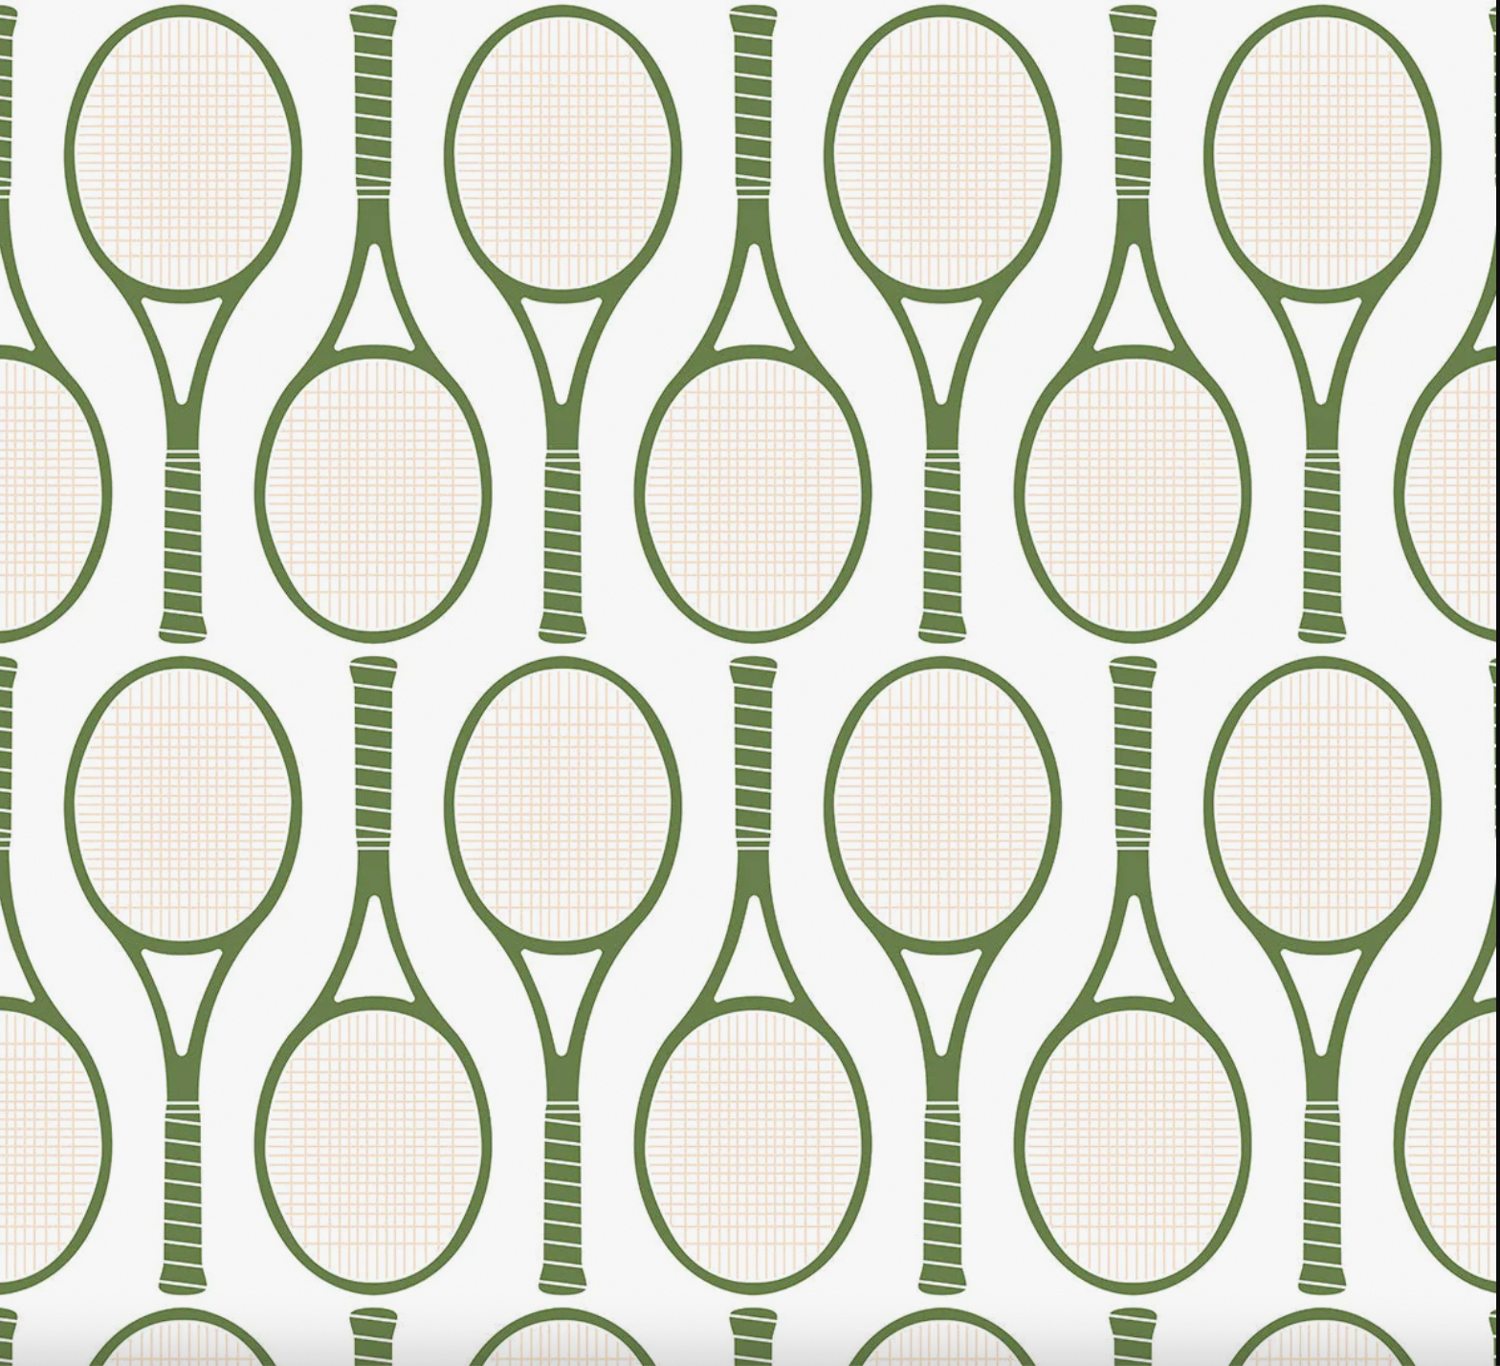 wallpaper with multiple green tennis rackets